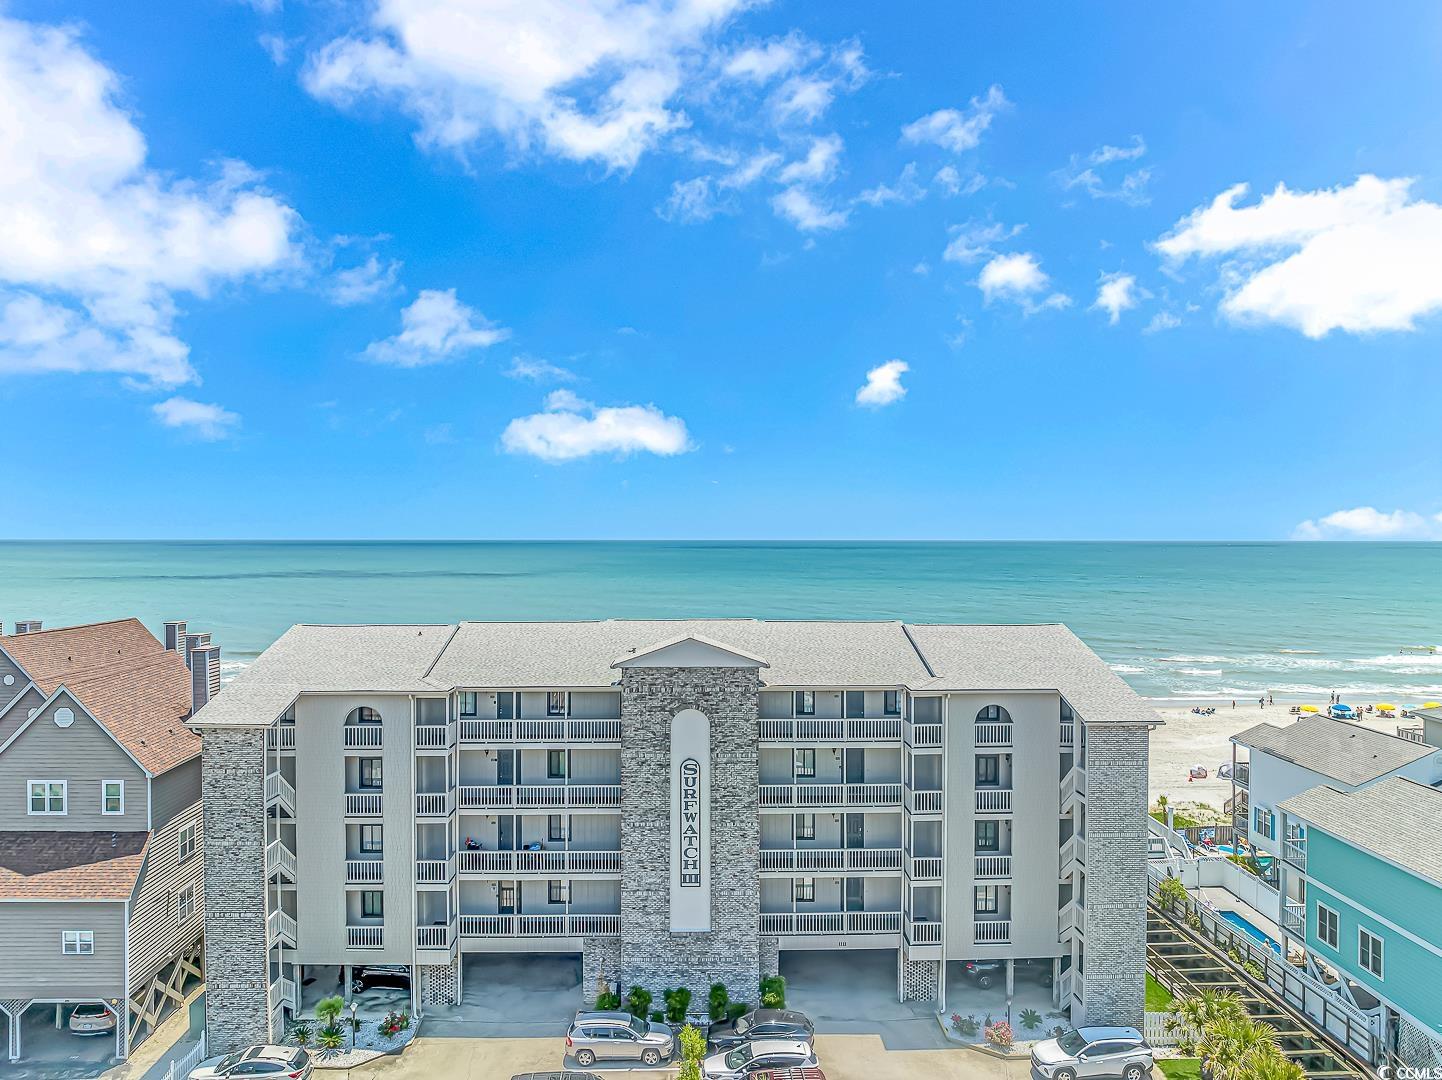 rare find! updated oceanfront condo located in surfside beach! this condo has two bedrooms, two bathrooms, new luxury vinyl flooring, custom cabinets, granite countertops and tile showers/tub combo. surfwatch lll condo complex has an elevator, plenty of parking and a community pool. enjoy endless ocean views from your balcony. this unit is located on the third floor and is an end unit. grab your flip flops and beach chair and enjoy what coastal life is all about! buyer is responsible for verification of square footage, hoa & zoning.